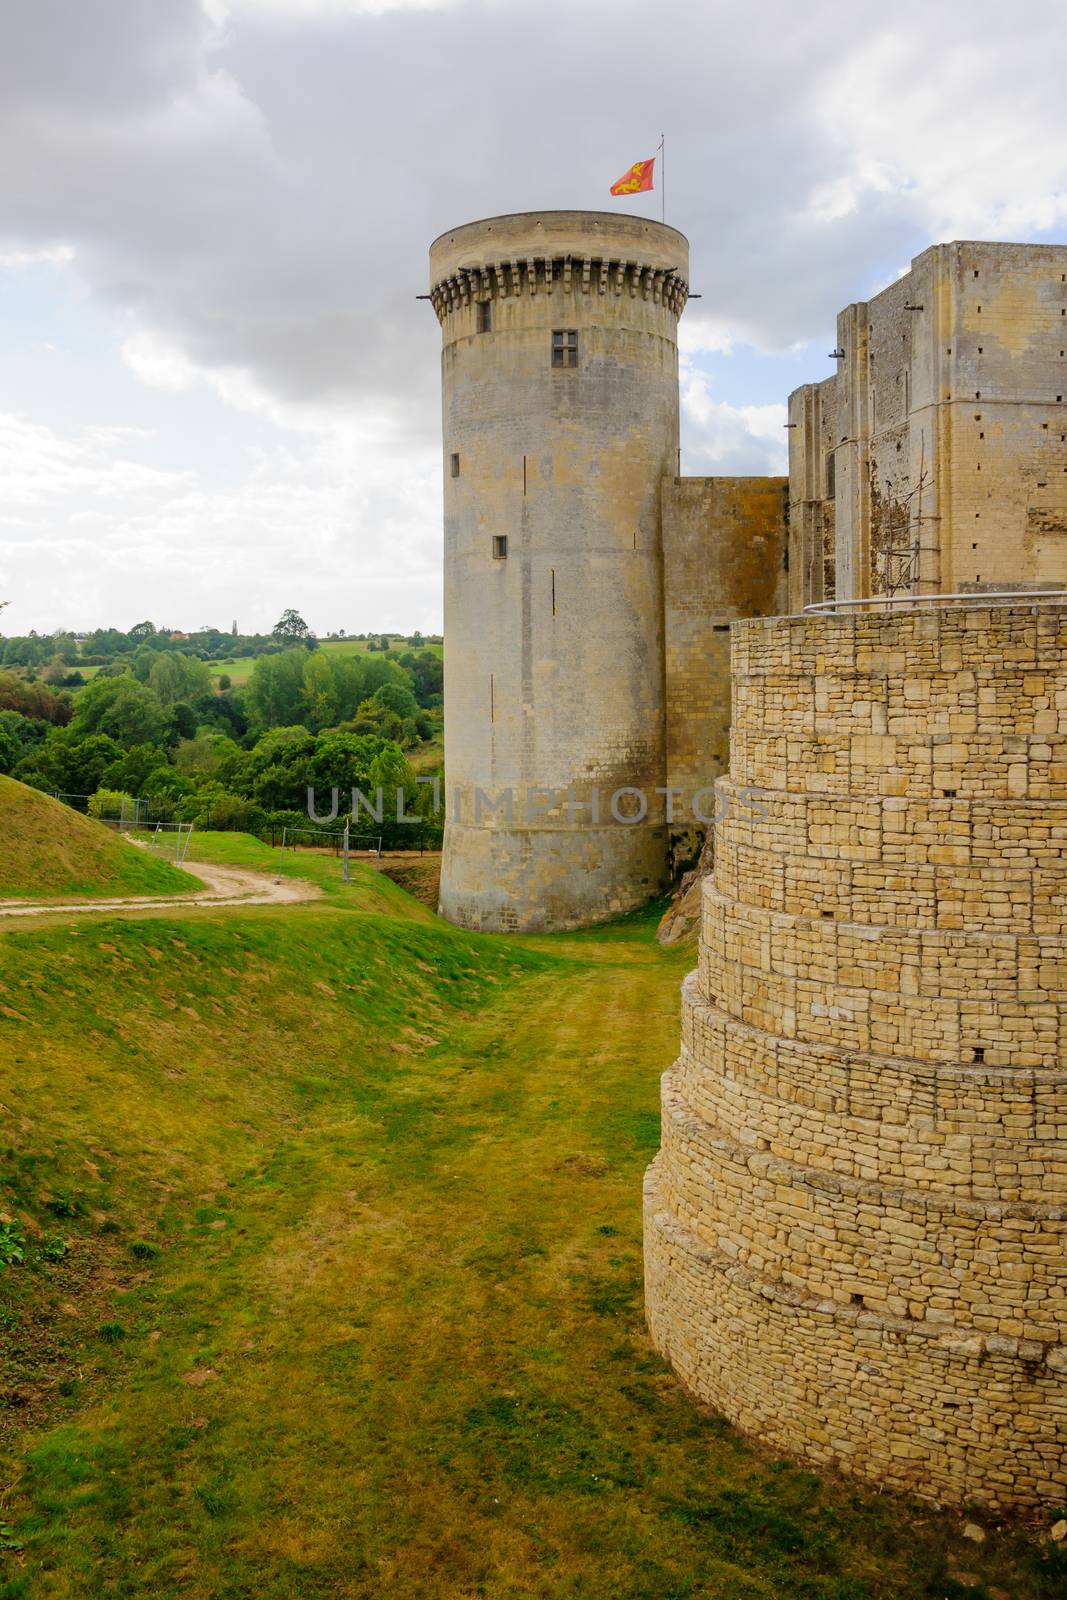 View of the Chateau de Falaise, the Castle of William the Conqueror, in Falaise, Normandy, France